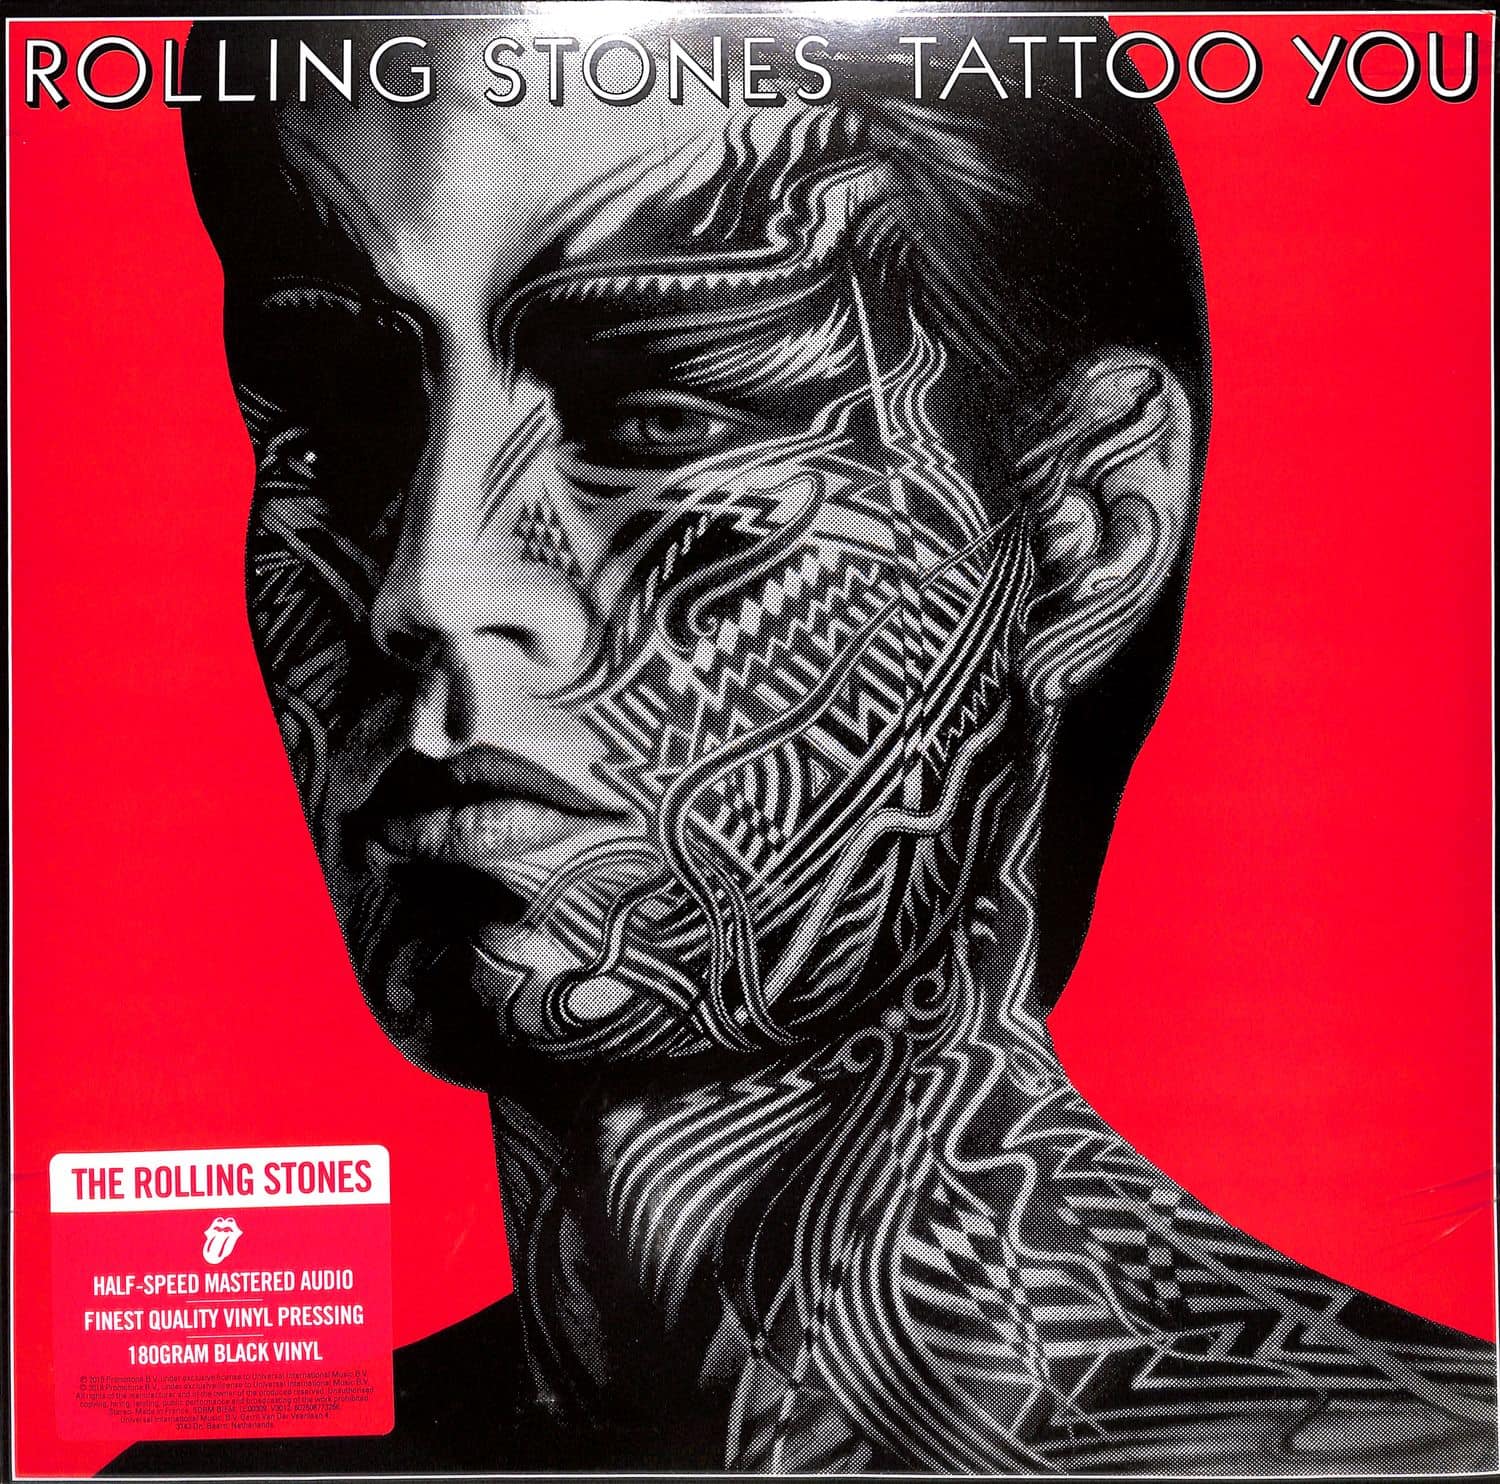 The Rolling Stones - TATTOO YOU 